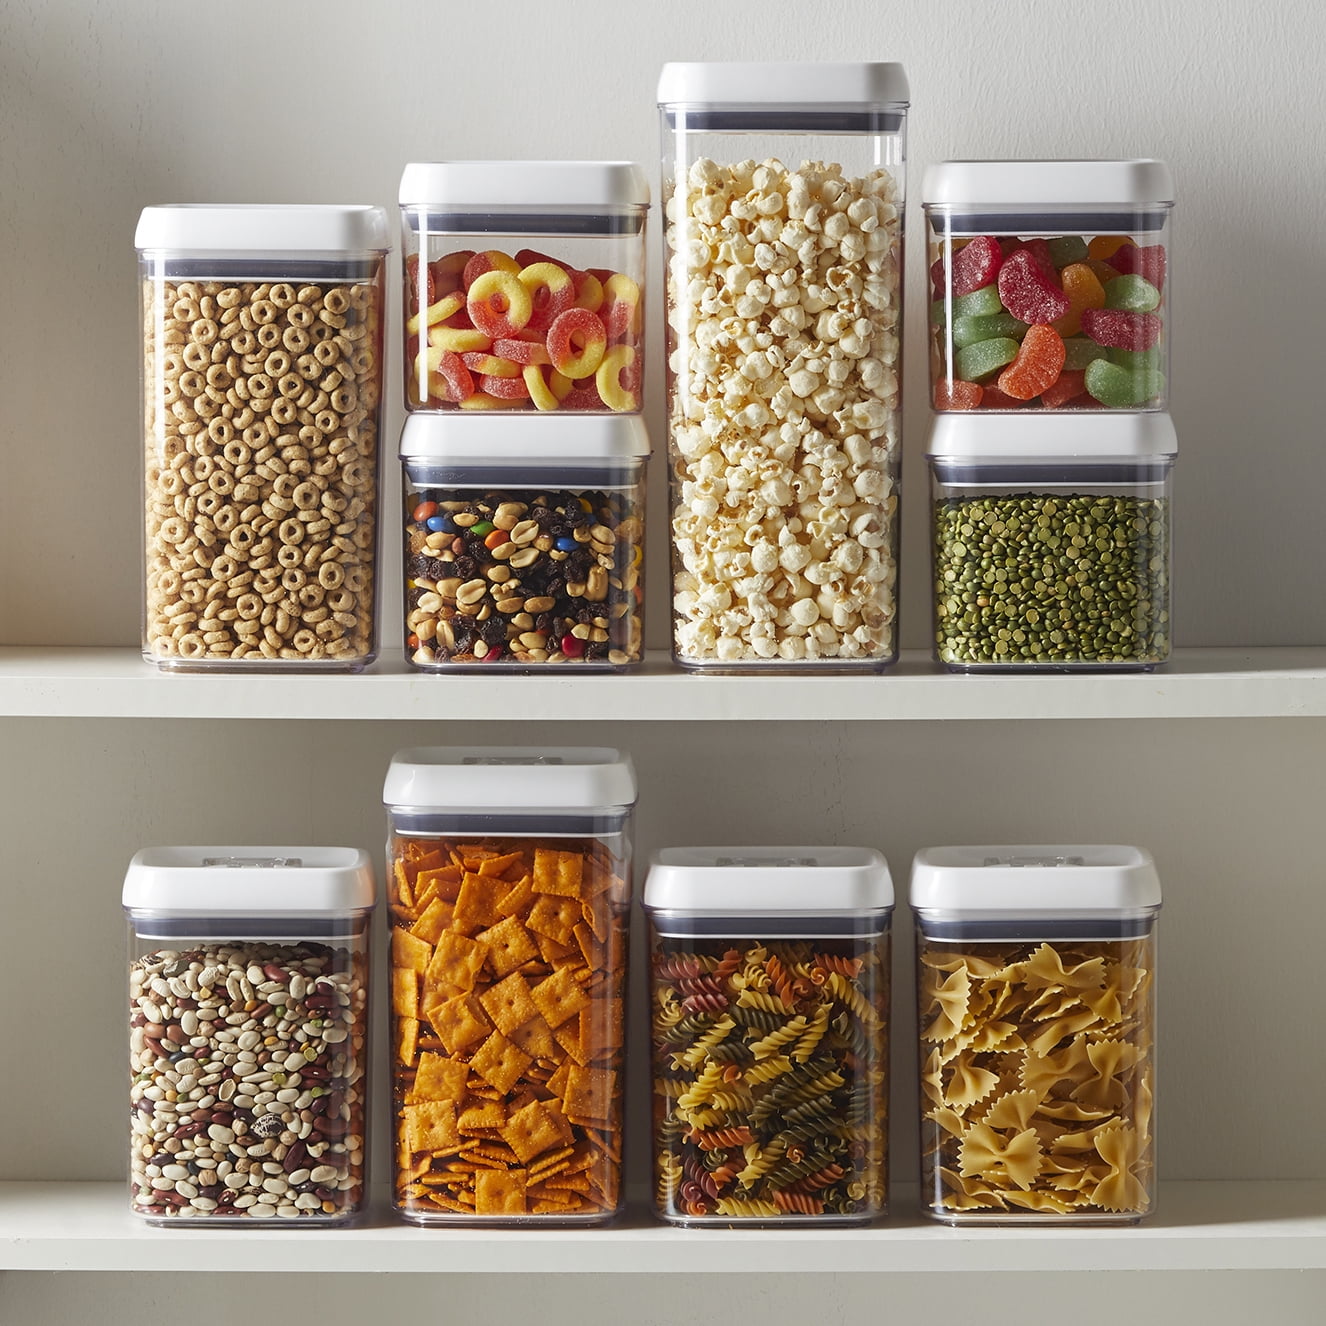 Better Homes & Gardens Flip Tite Food Storage Containers, 8-Pack